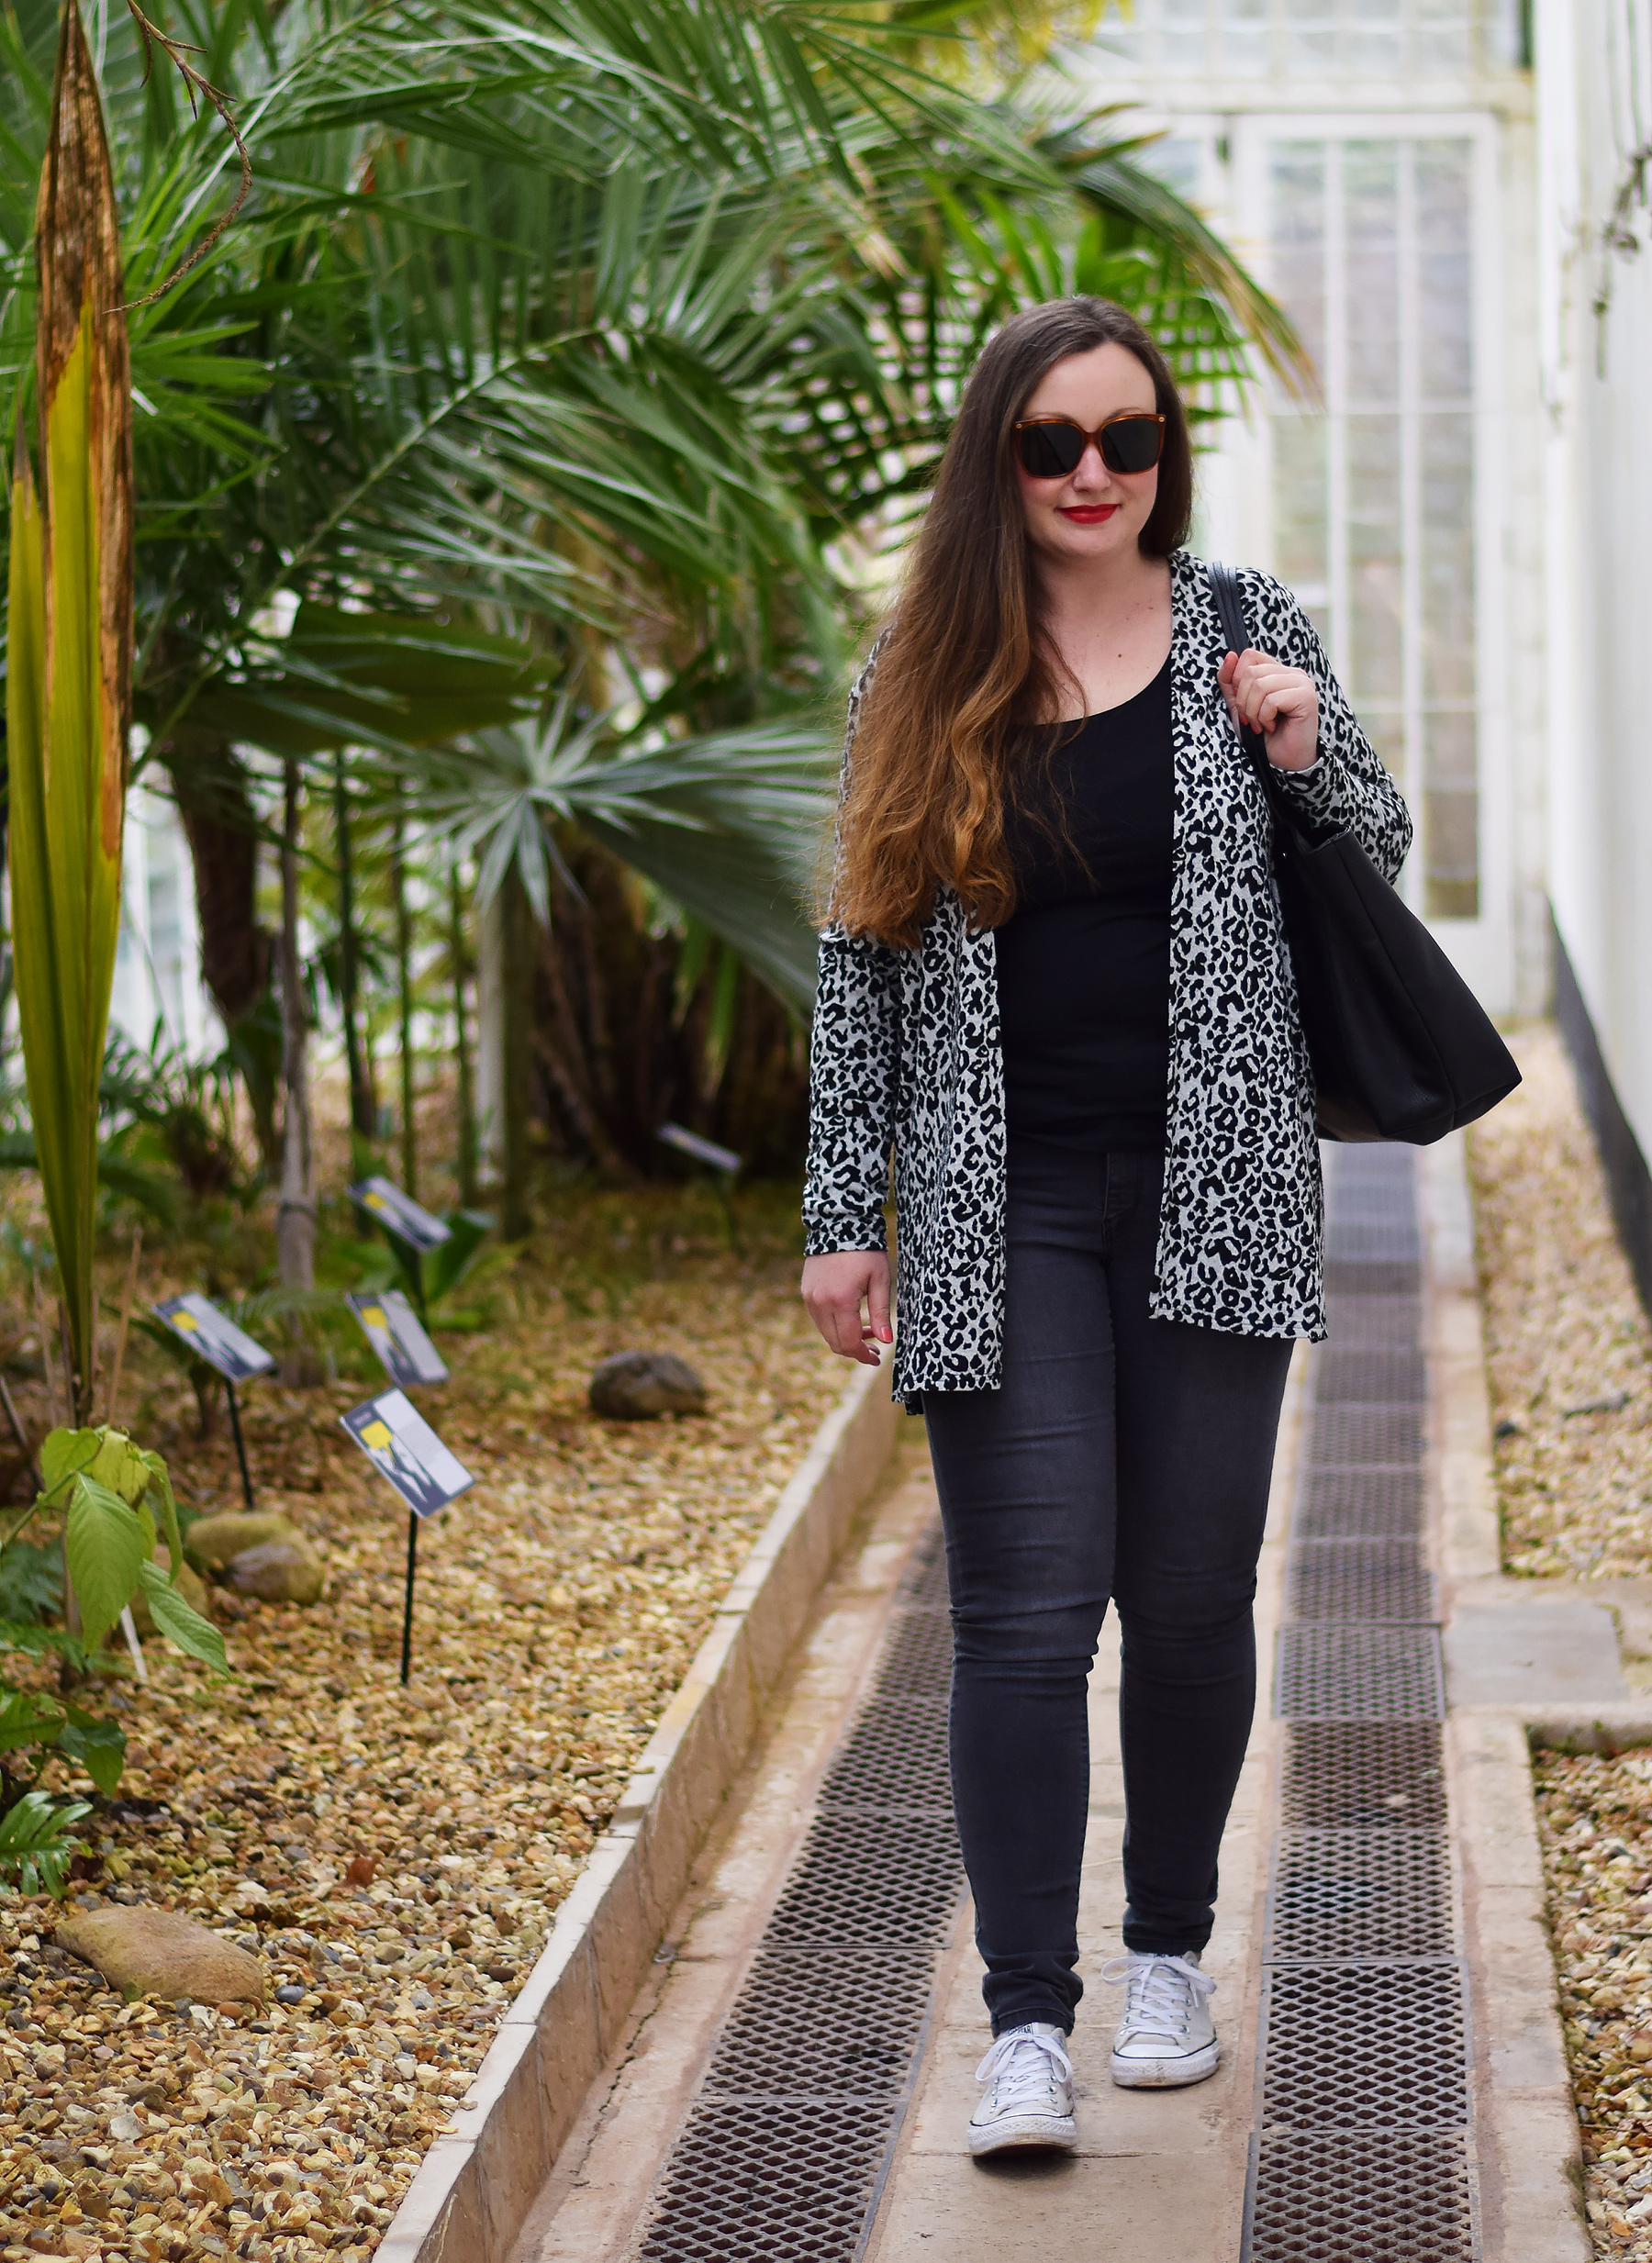 Black and white leopard print cardigan outfit at the palm house 